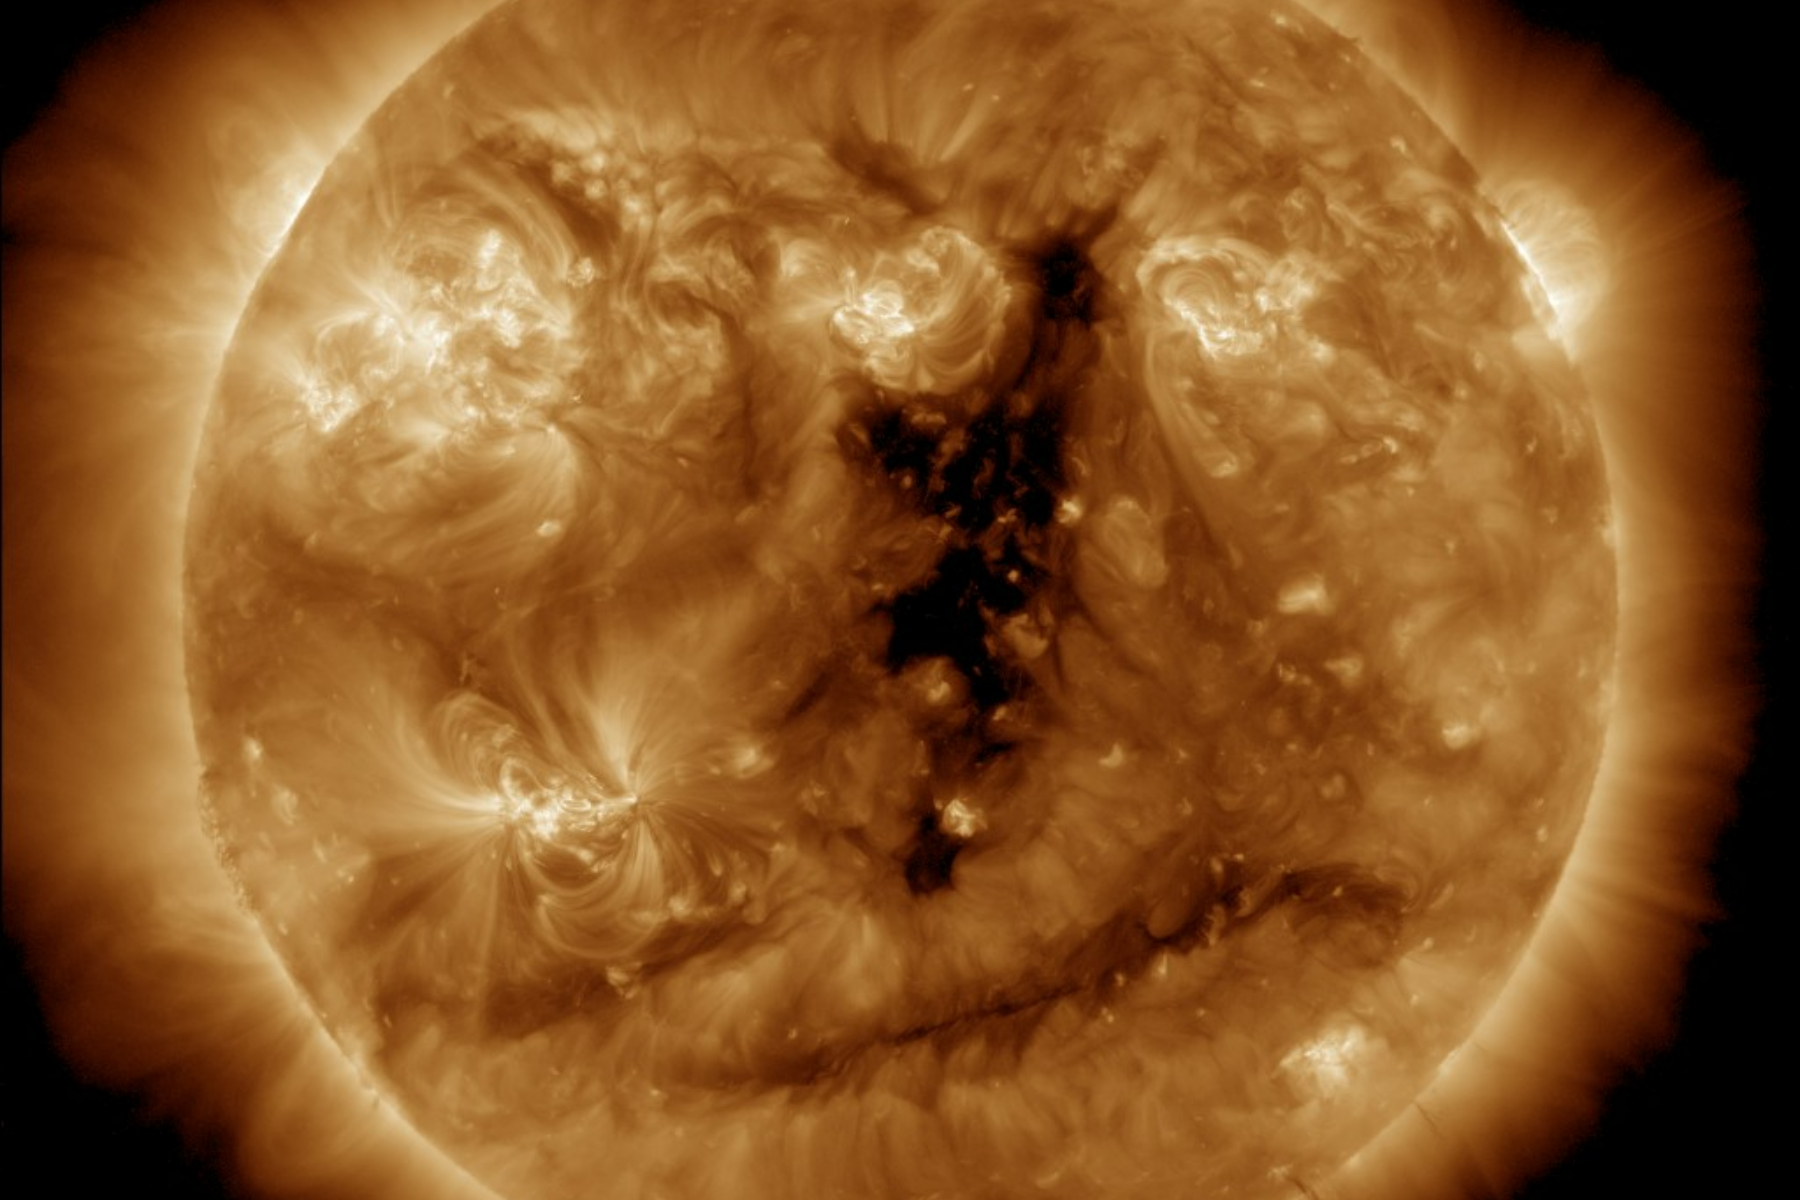 Sun May Be Waking up with Sudden Surge in Activity and Hyperactive Sunspot